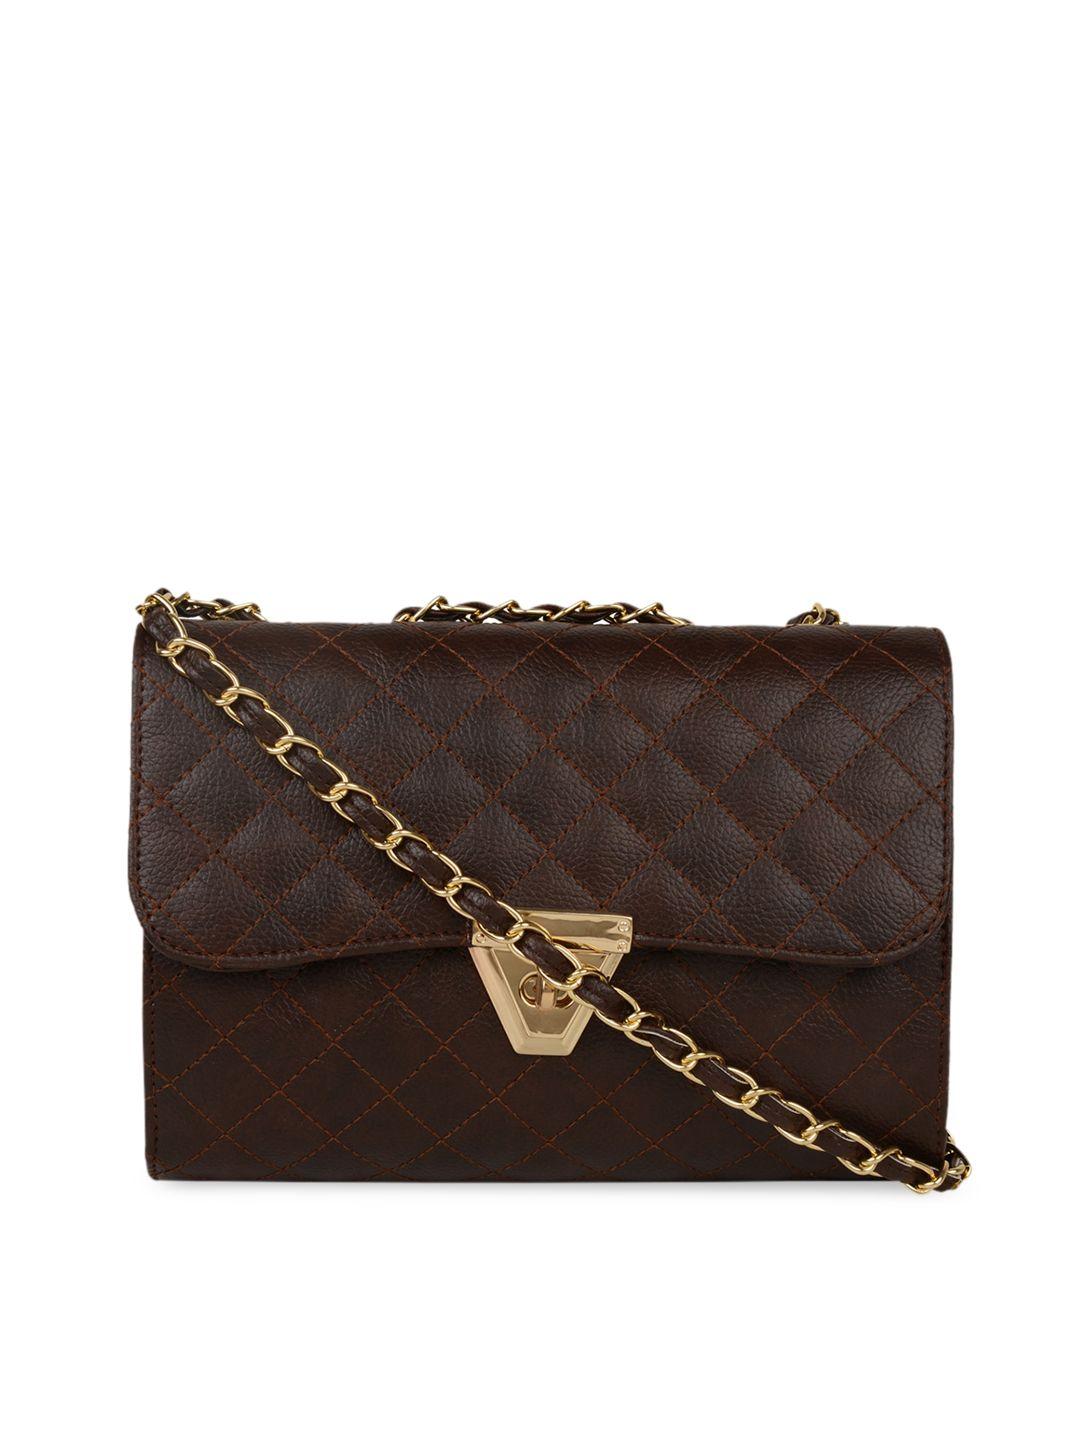 vivinkaa coffee brown textured structured sling bag with quilted